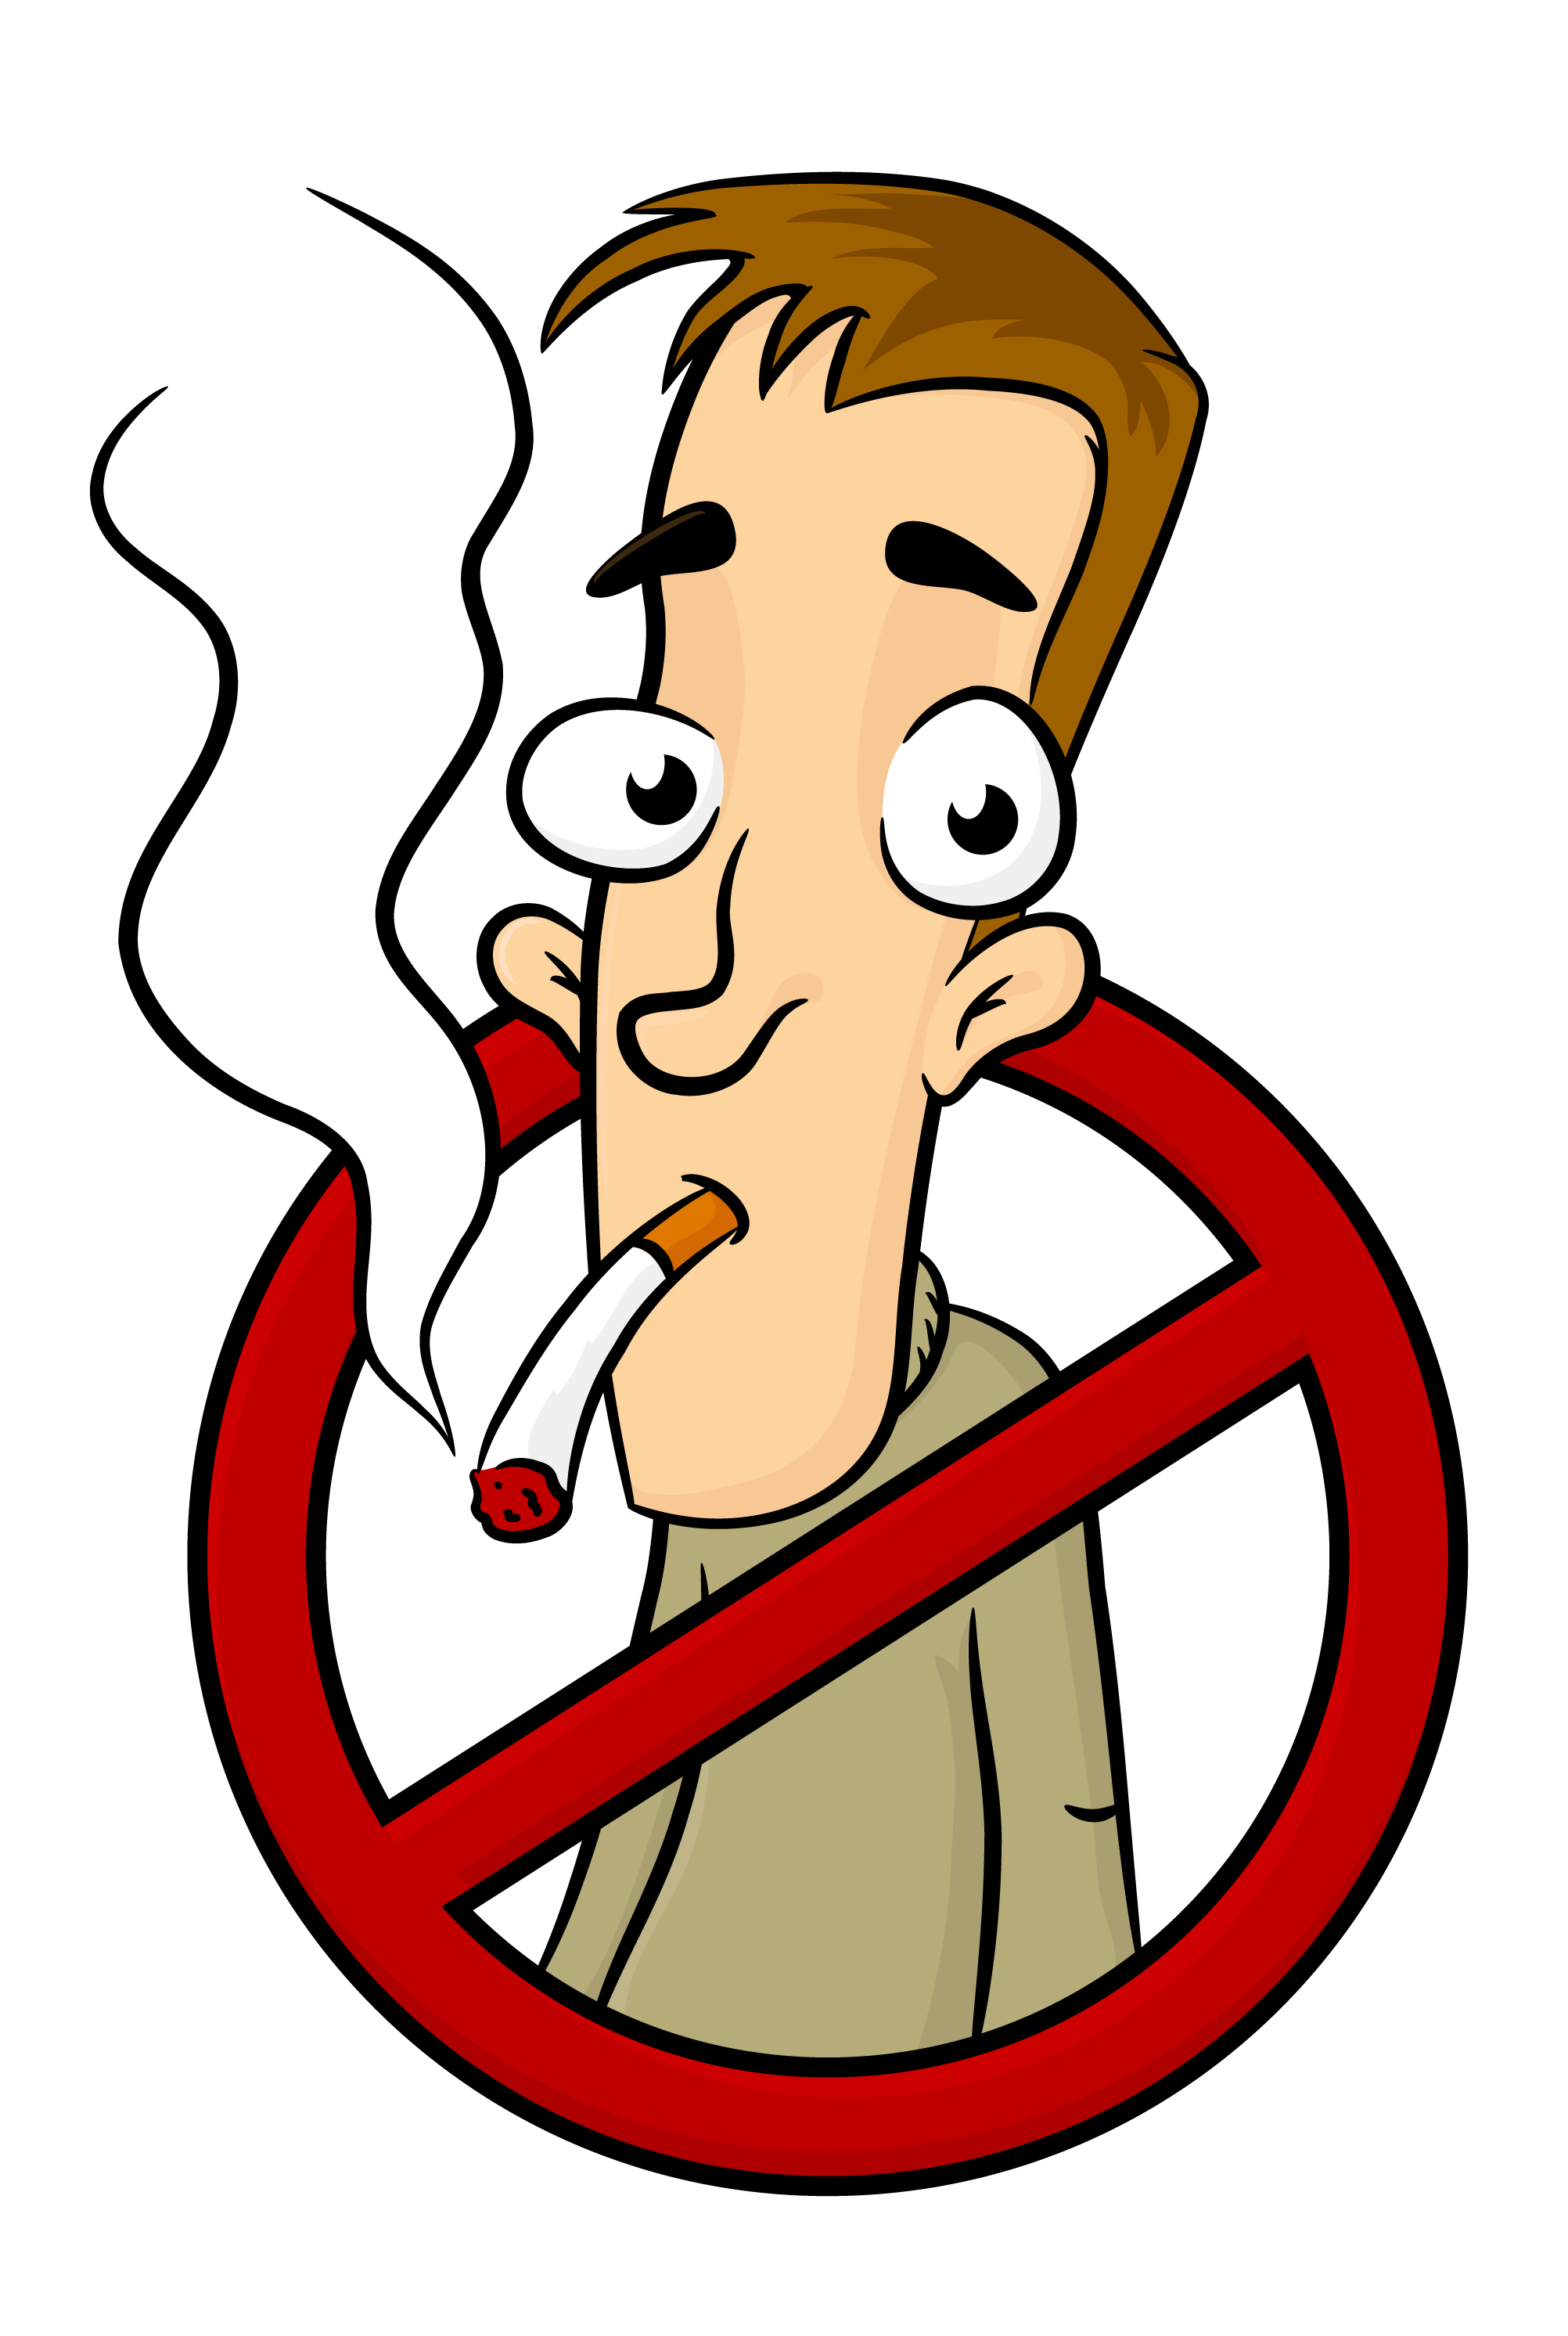 Harmful effects of smoking clipart - ClipartFox